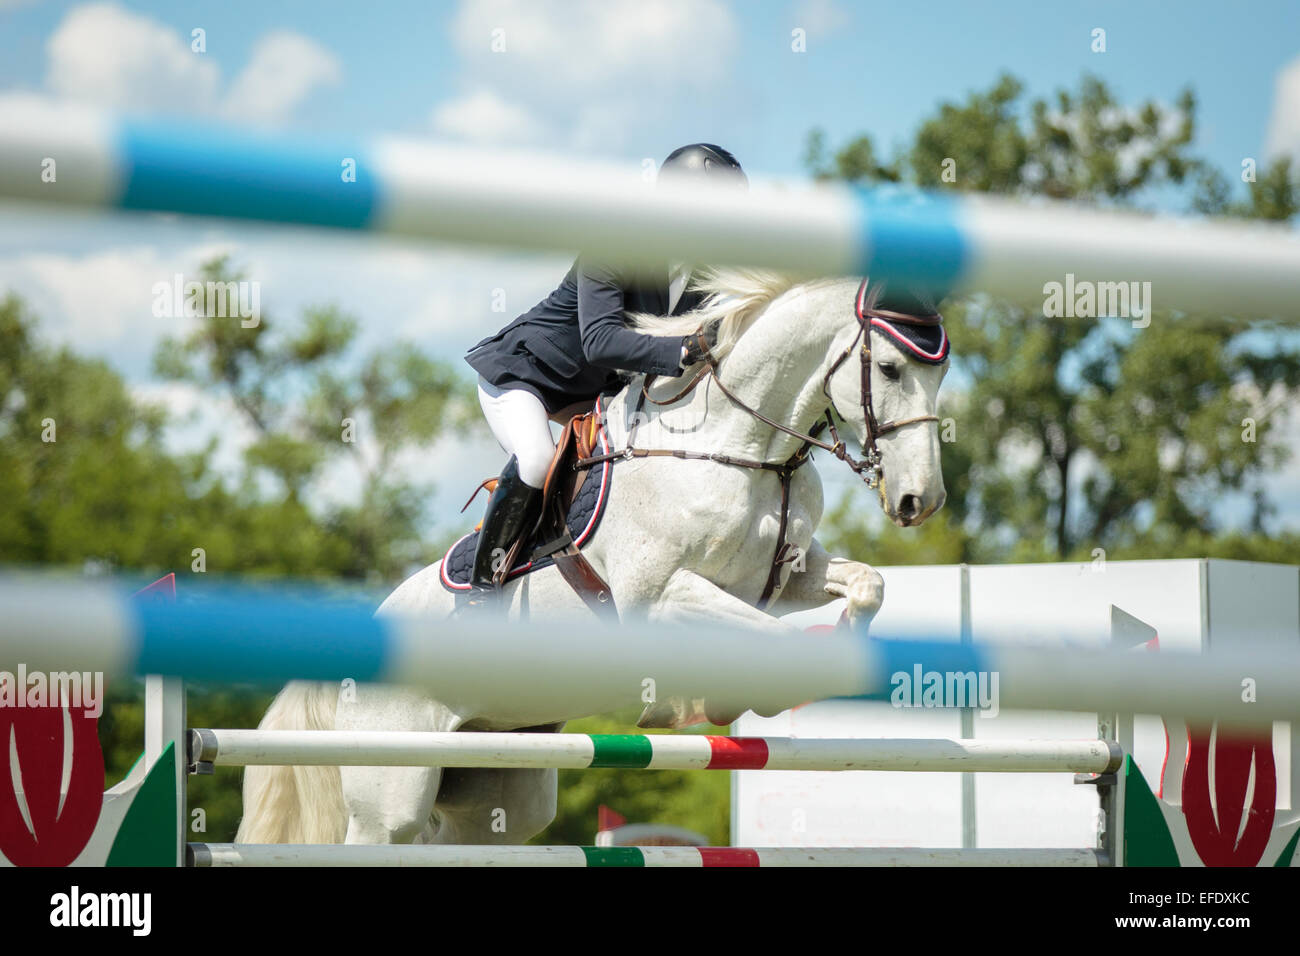 A rider on a sports horse jumping over an obstacle in equestrian competition Stock Photo